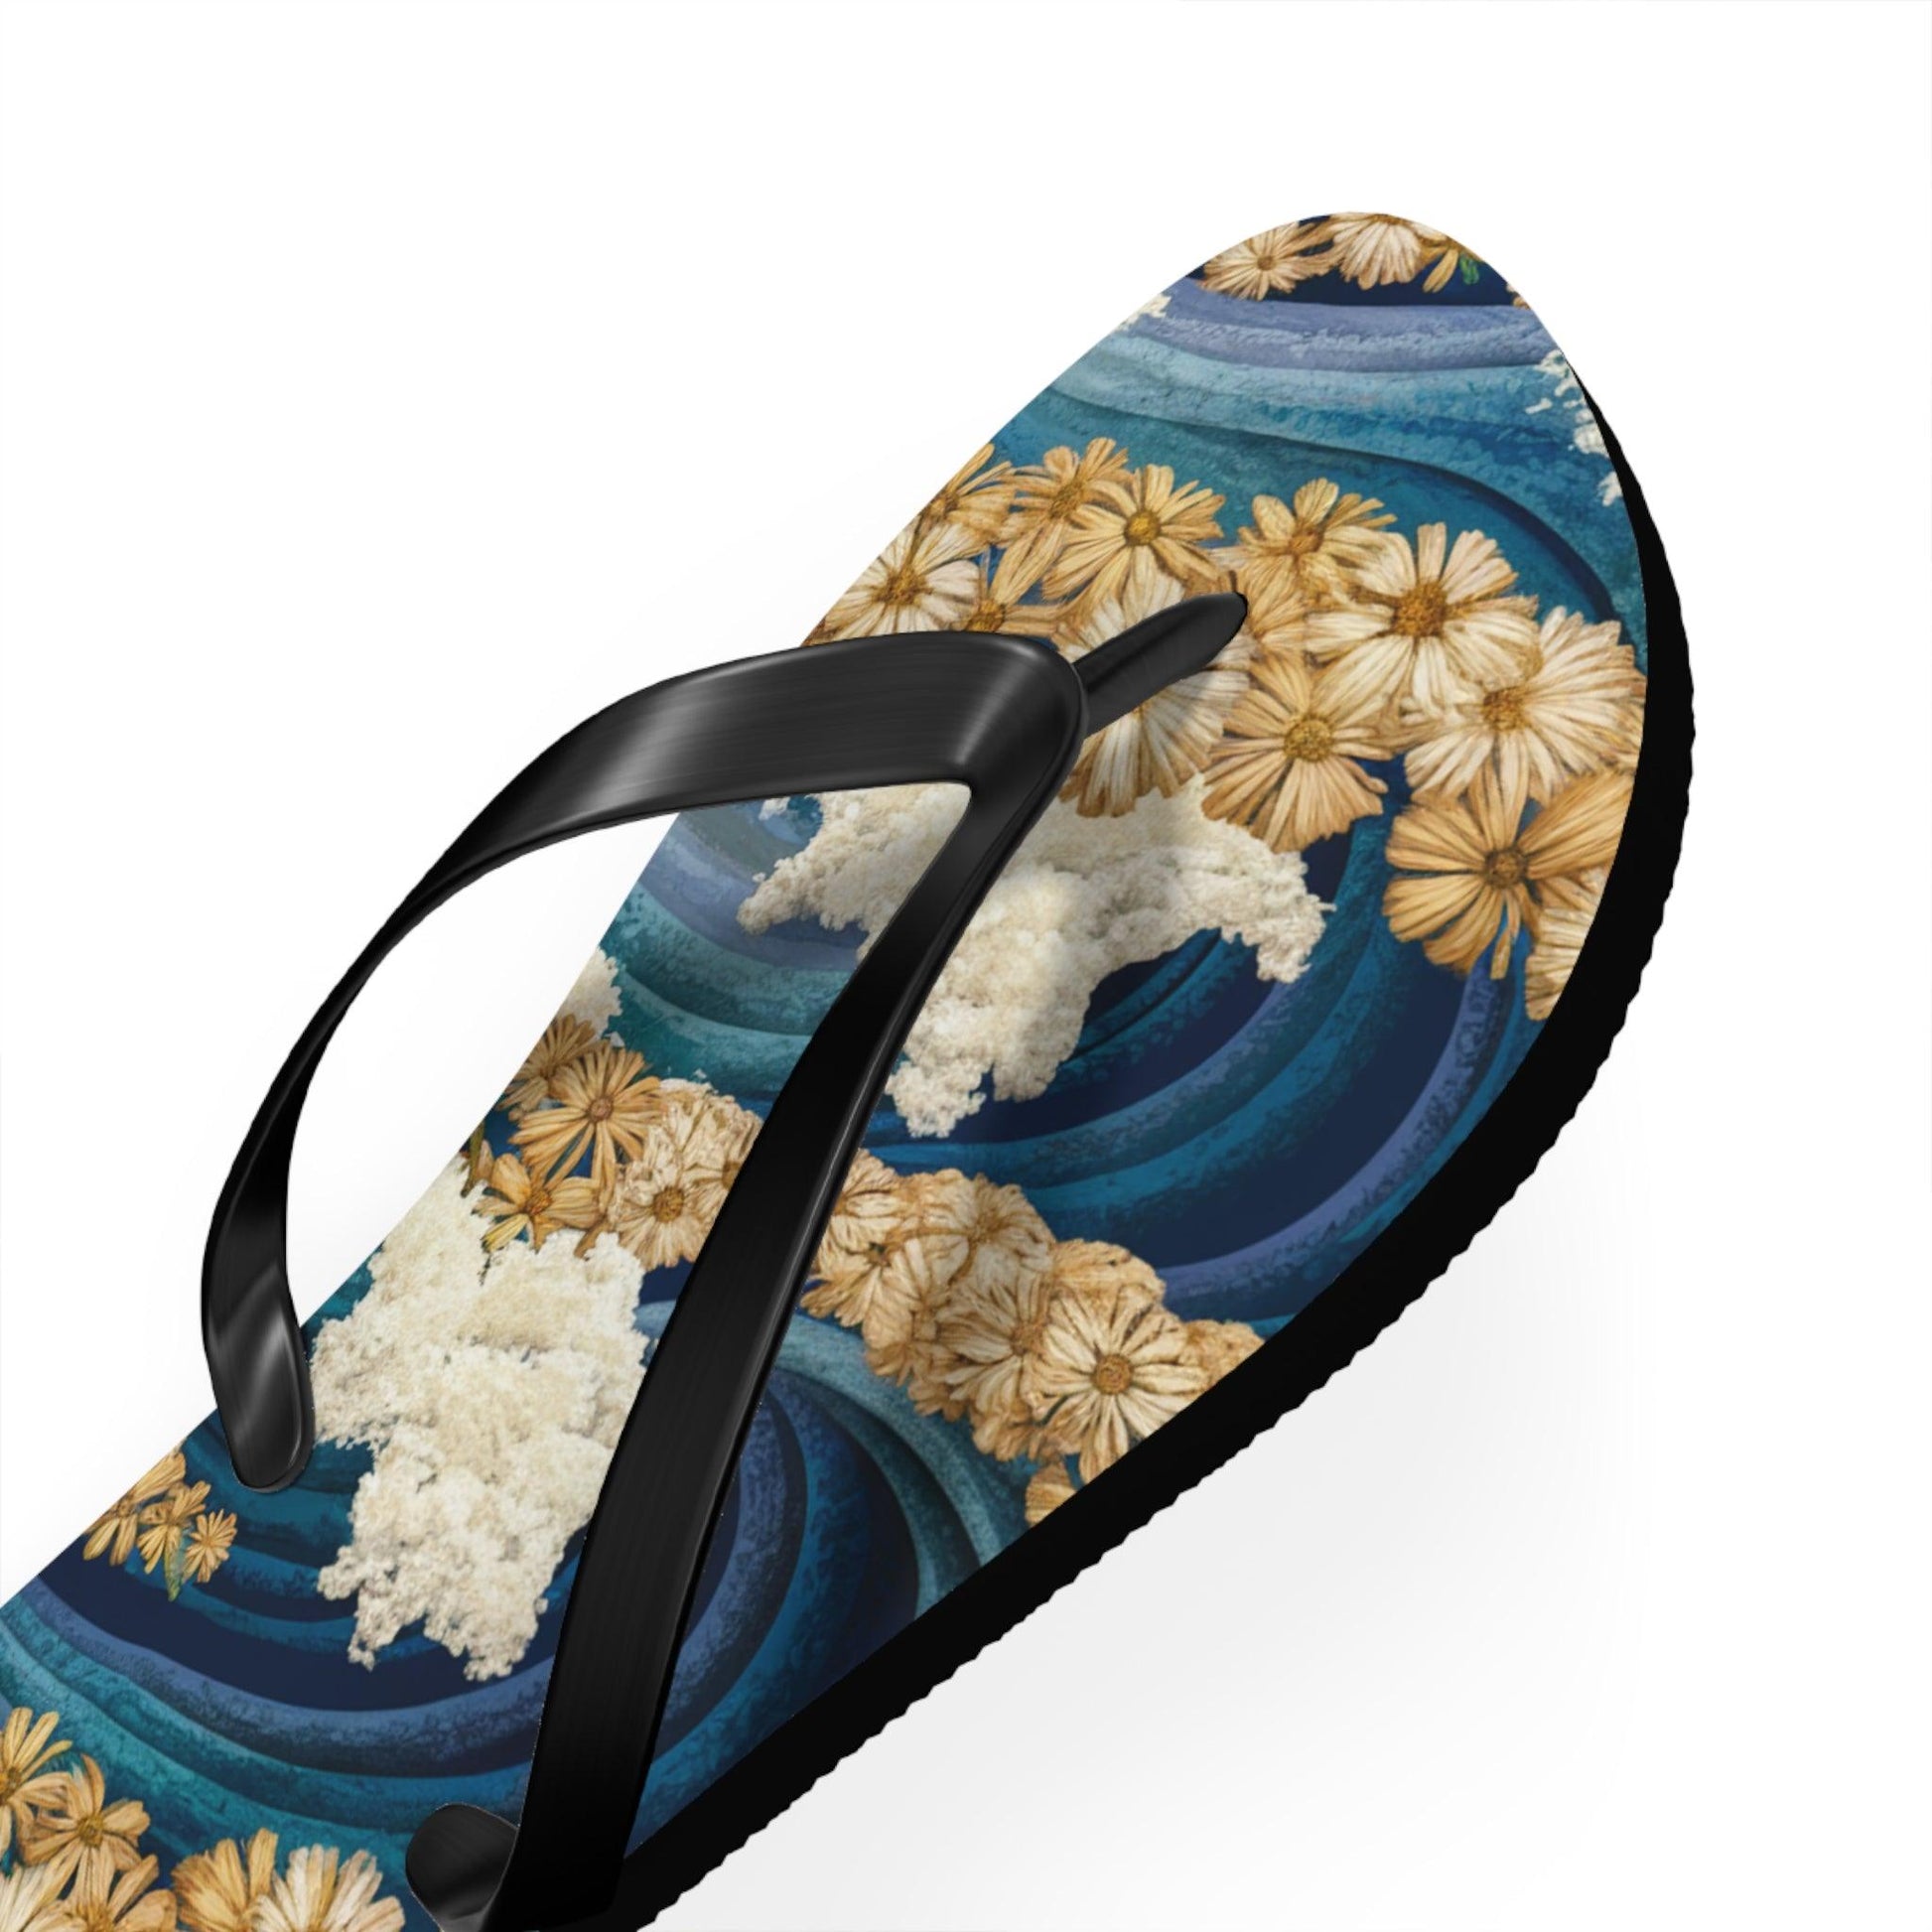 Sea Wave Yarrow Flower Inspired Flip Flops, Express Your Beach Loving Self - Coastal Collections